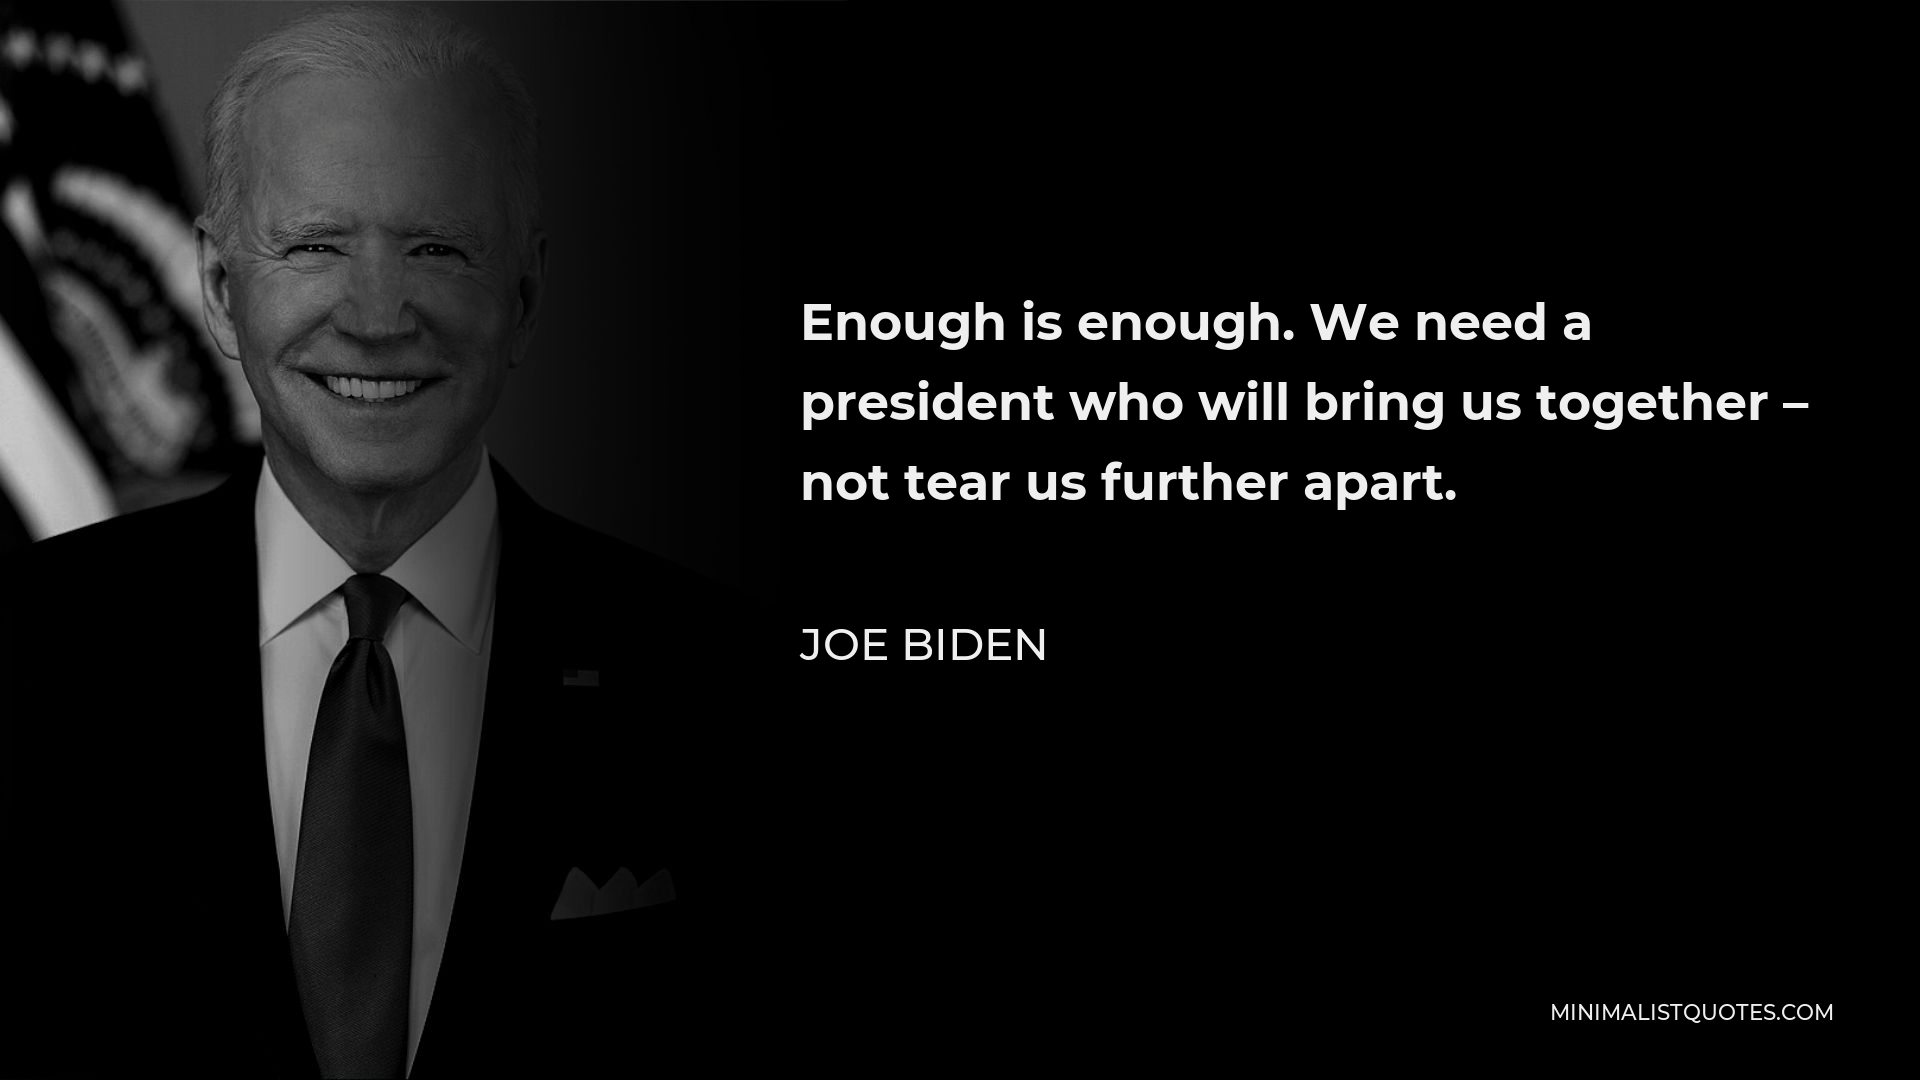 Joe Biden Quote - Enough is enough. We need a president who will bring us together – not tear us further apart.